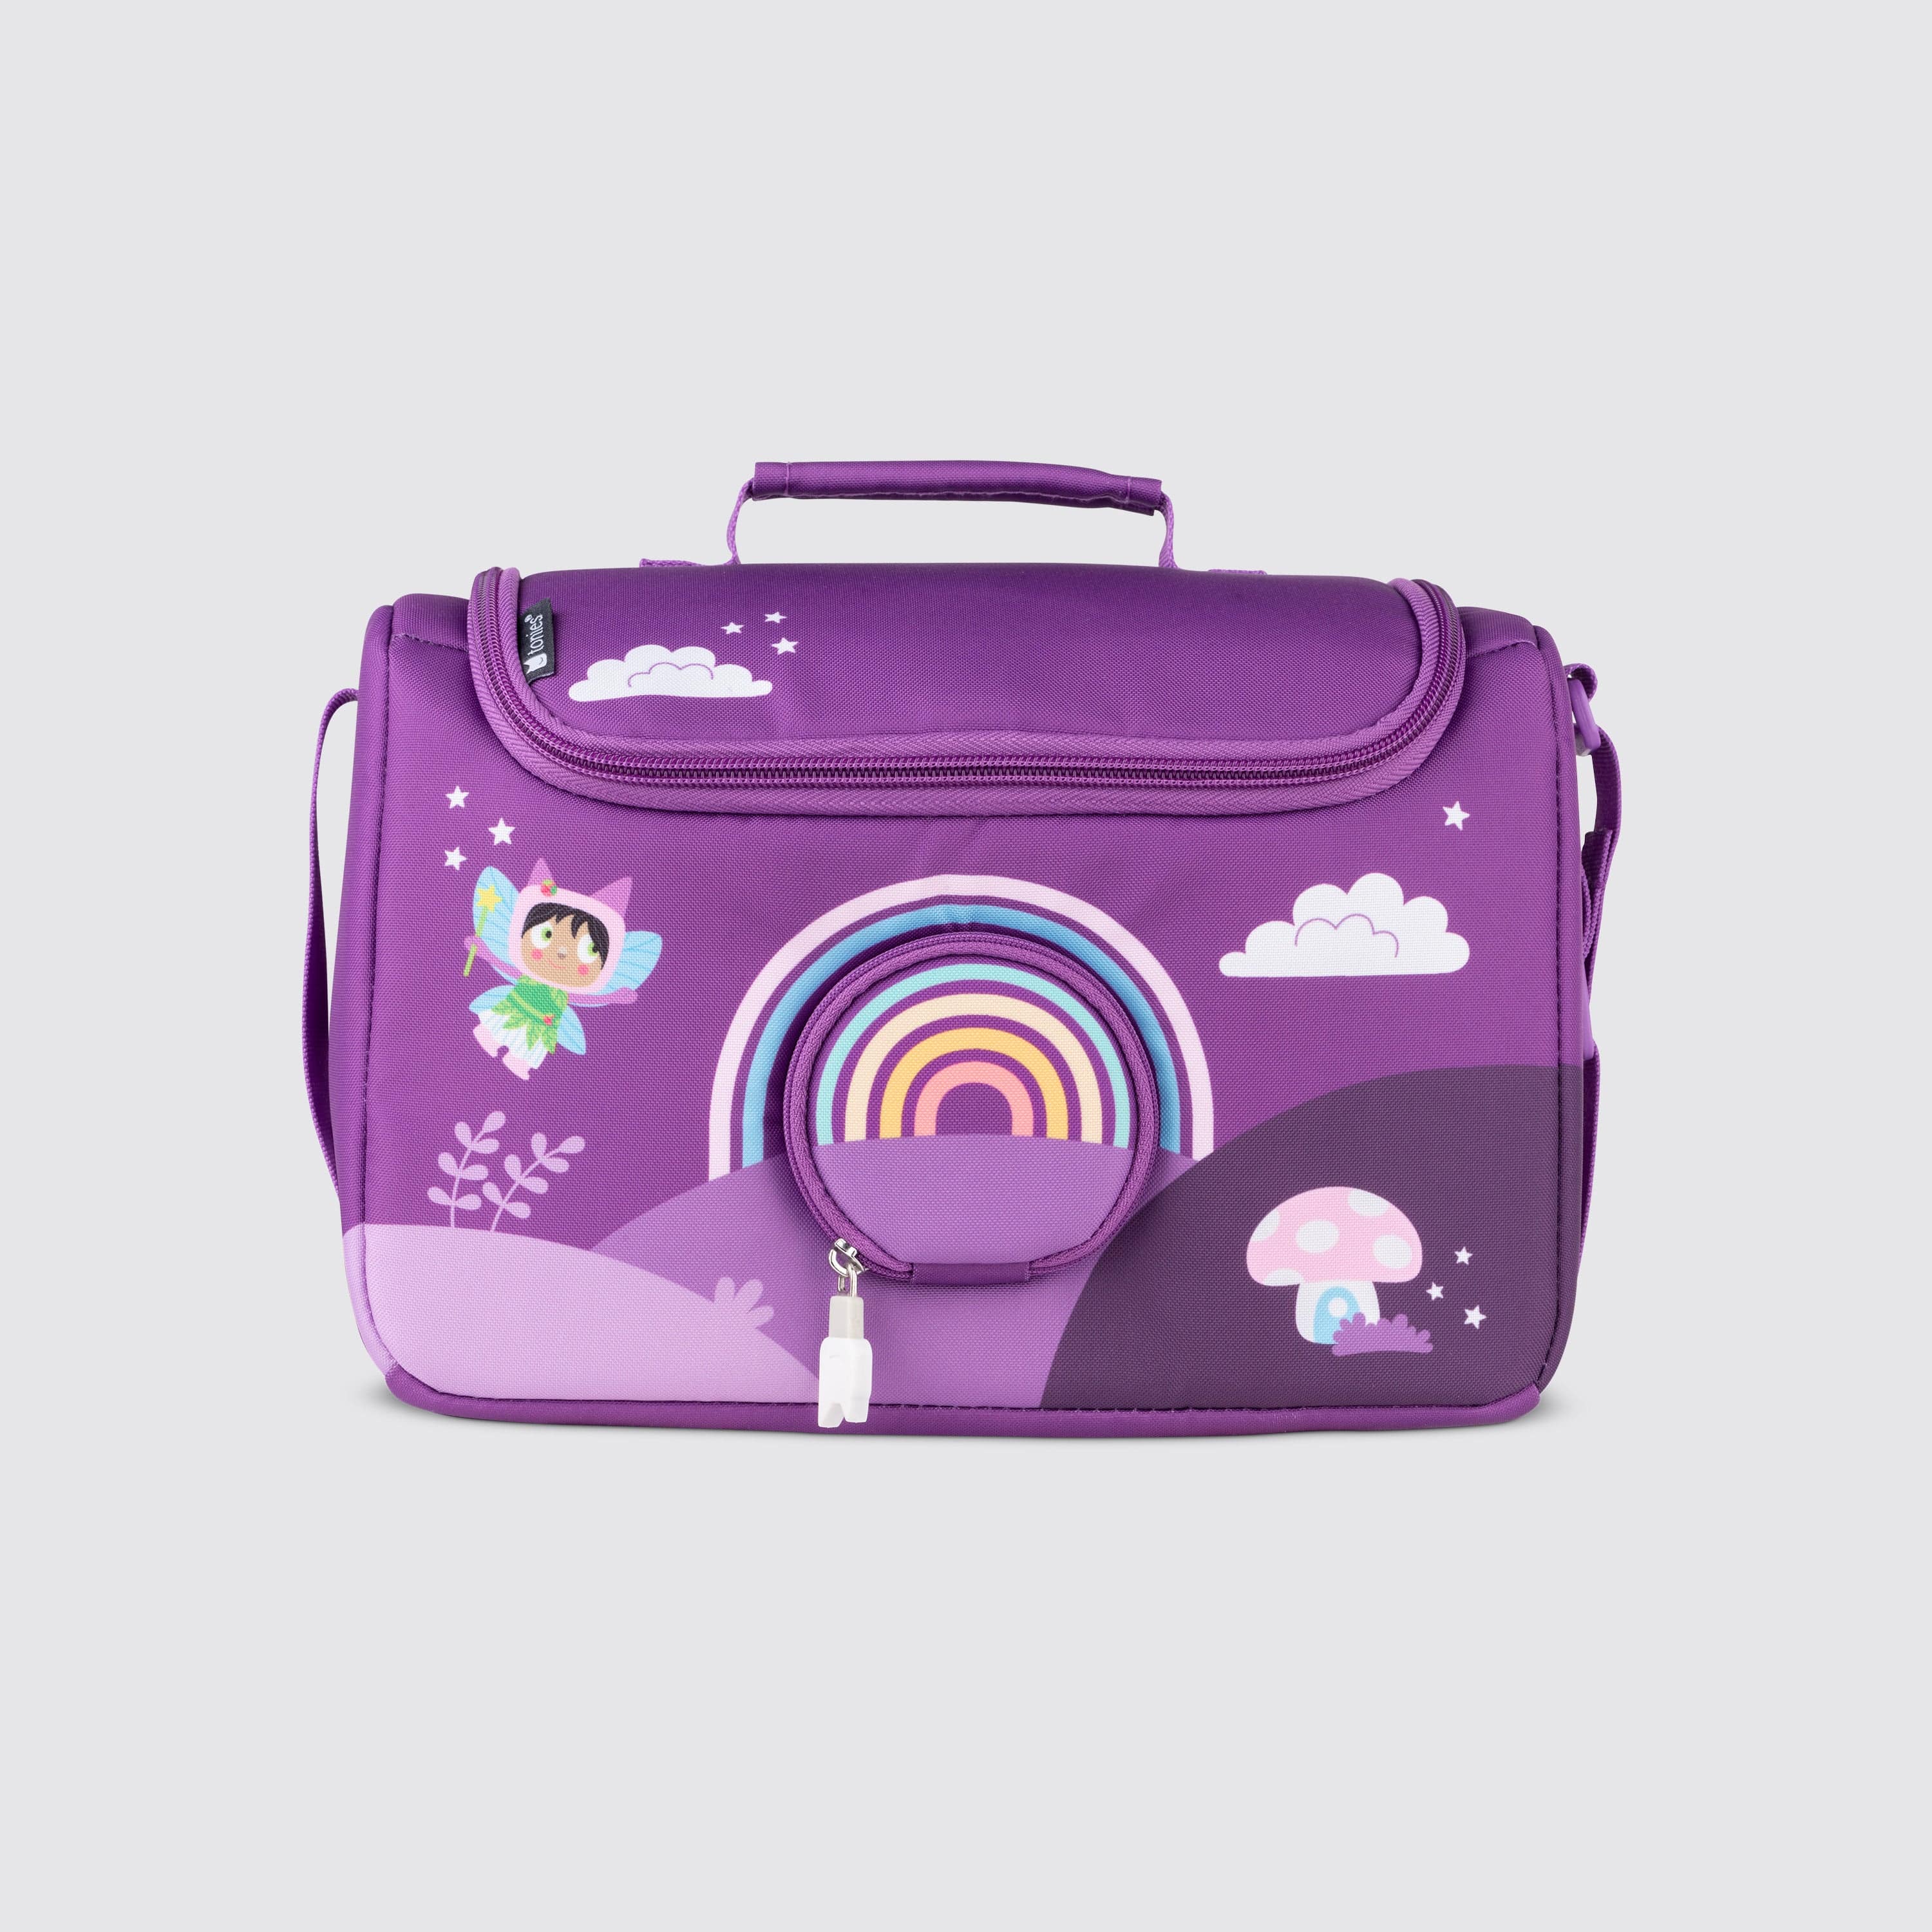 Tonies - Carrying Case Max Over The Rainbow